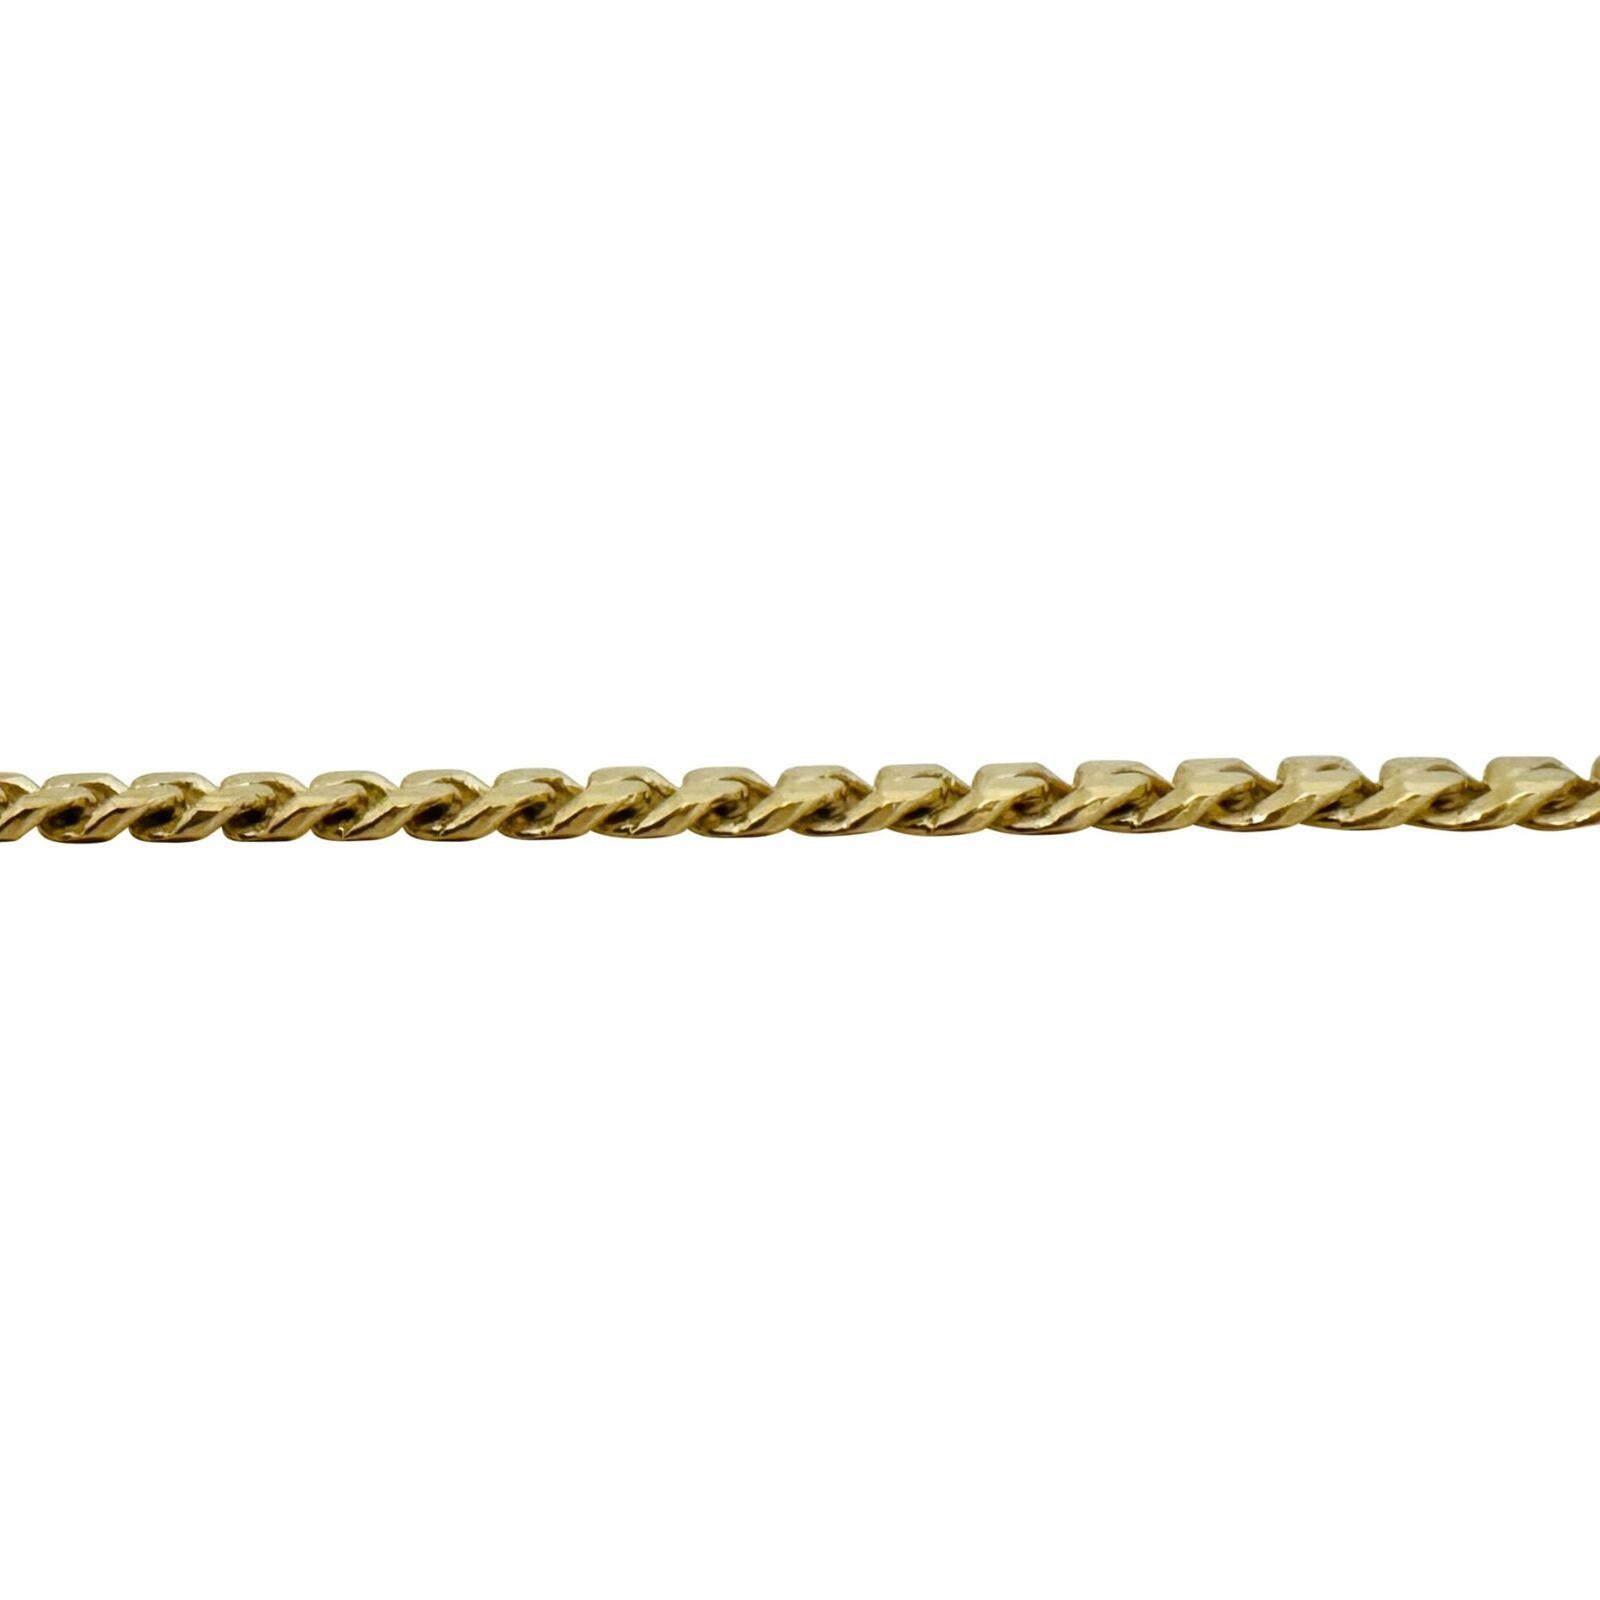 Women's or Men's 14 Karat Yellow Gold Solid Heavy Curb Link Chain Necklace Italy 